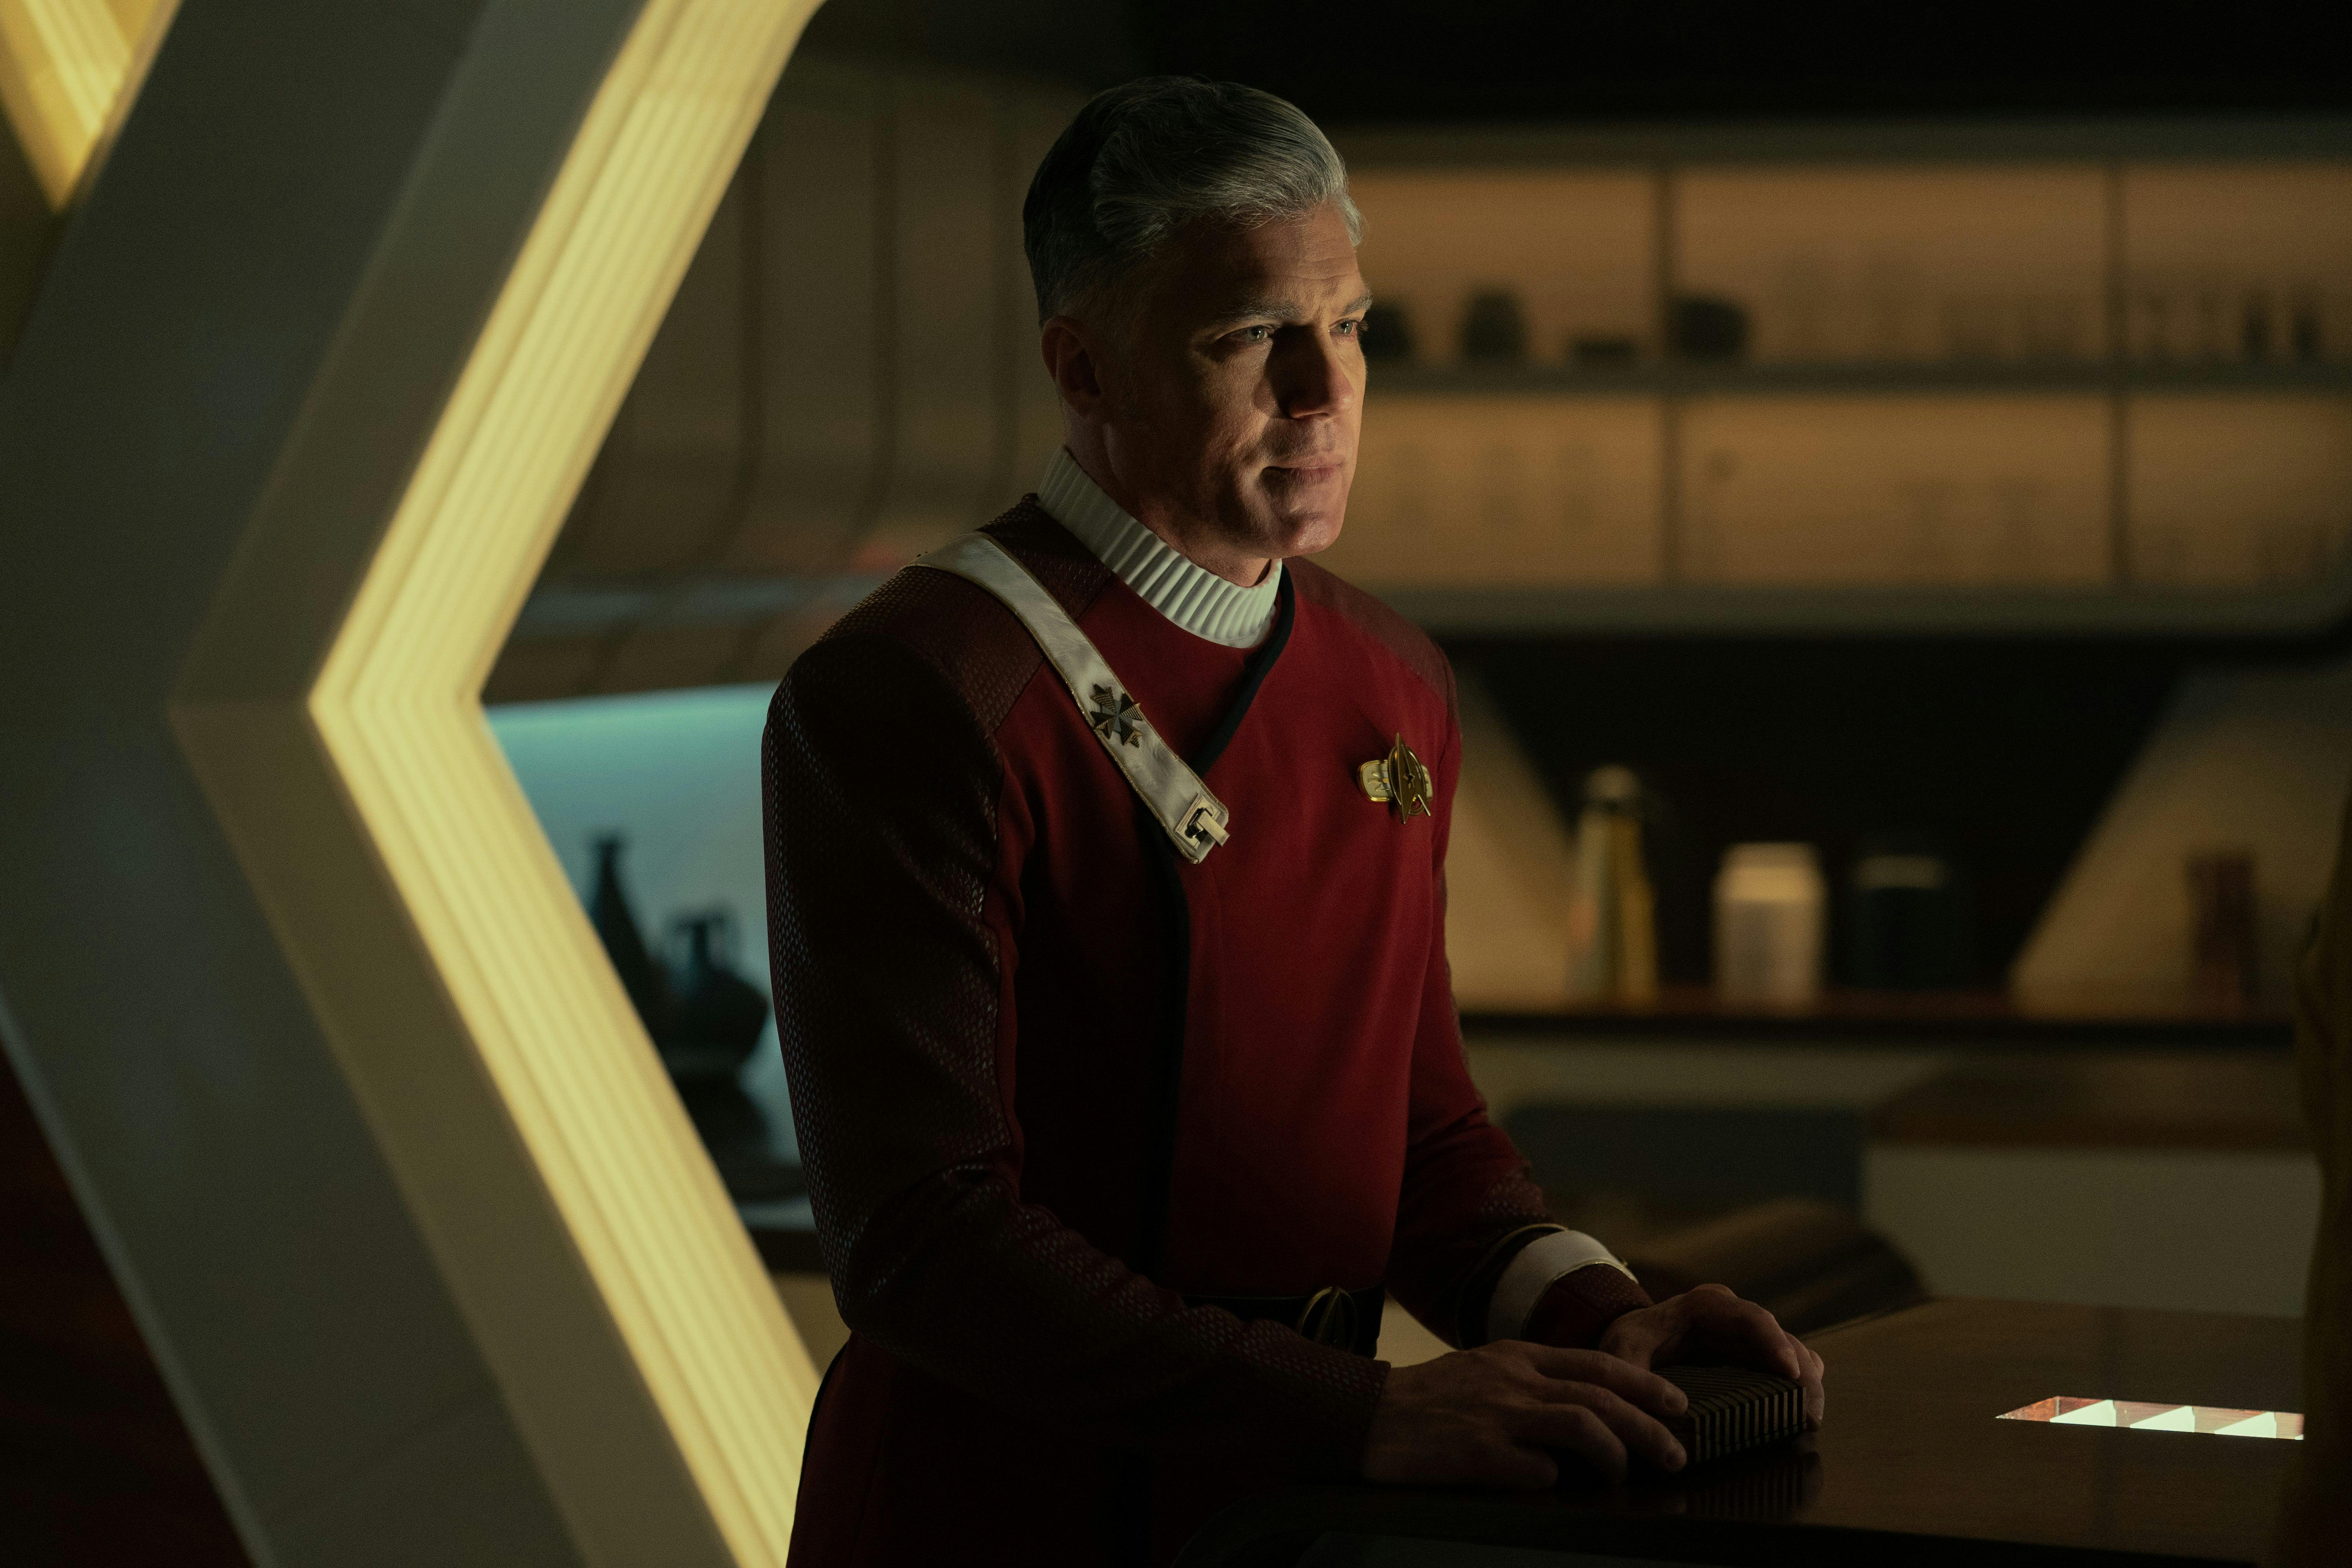 Captain Pike (Anson Mount) stands in his quarters, wearing the red uniform from Star Trek II: The Wrath of Khan.